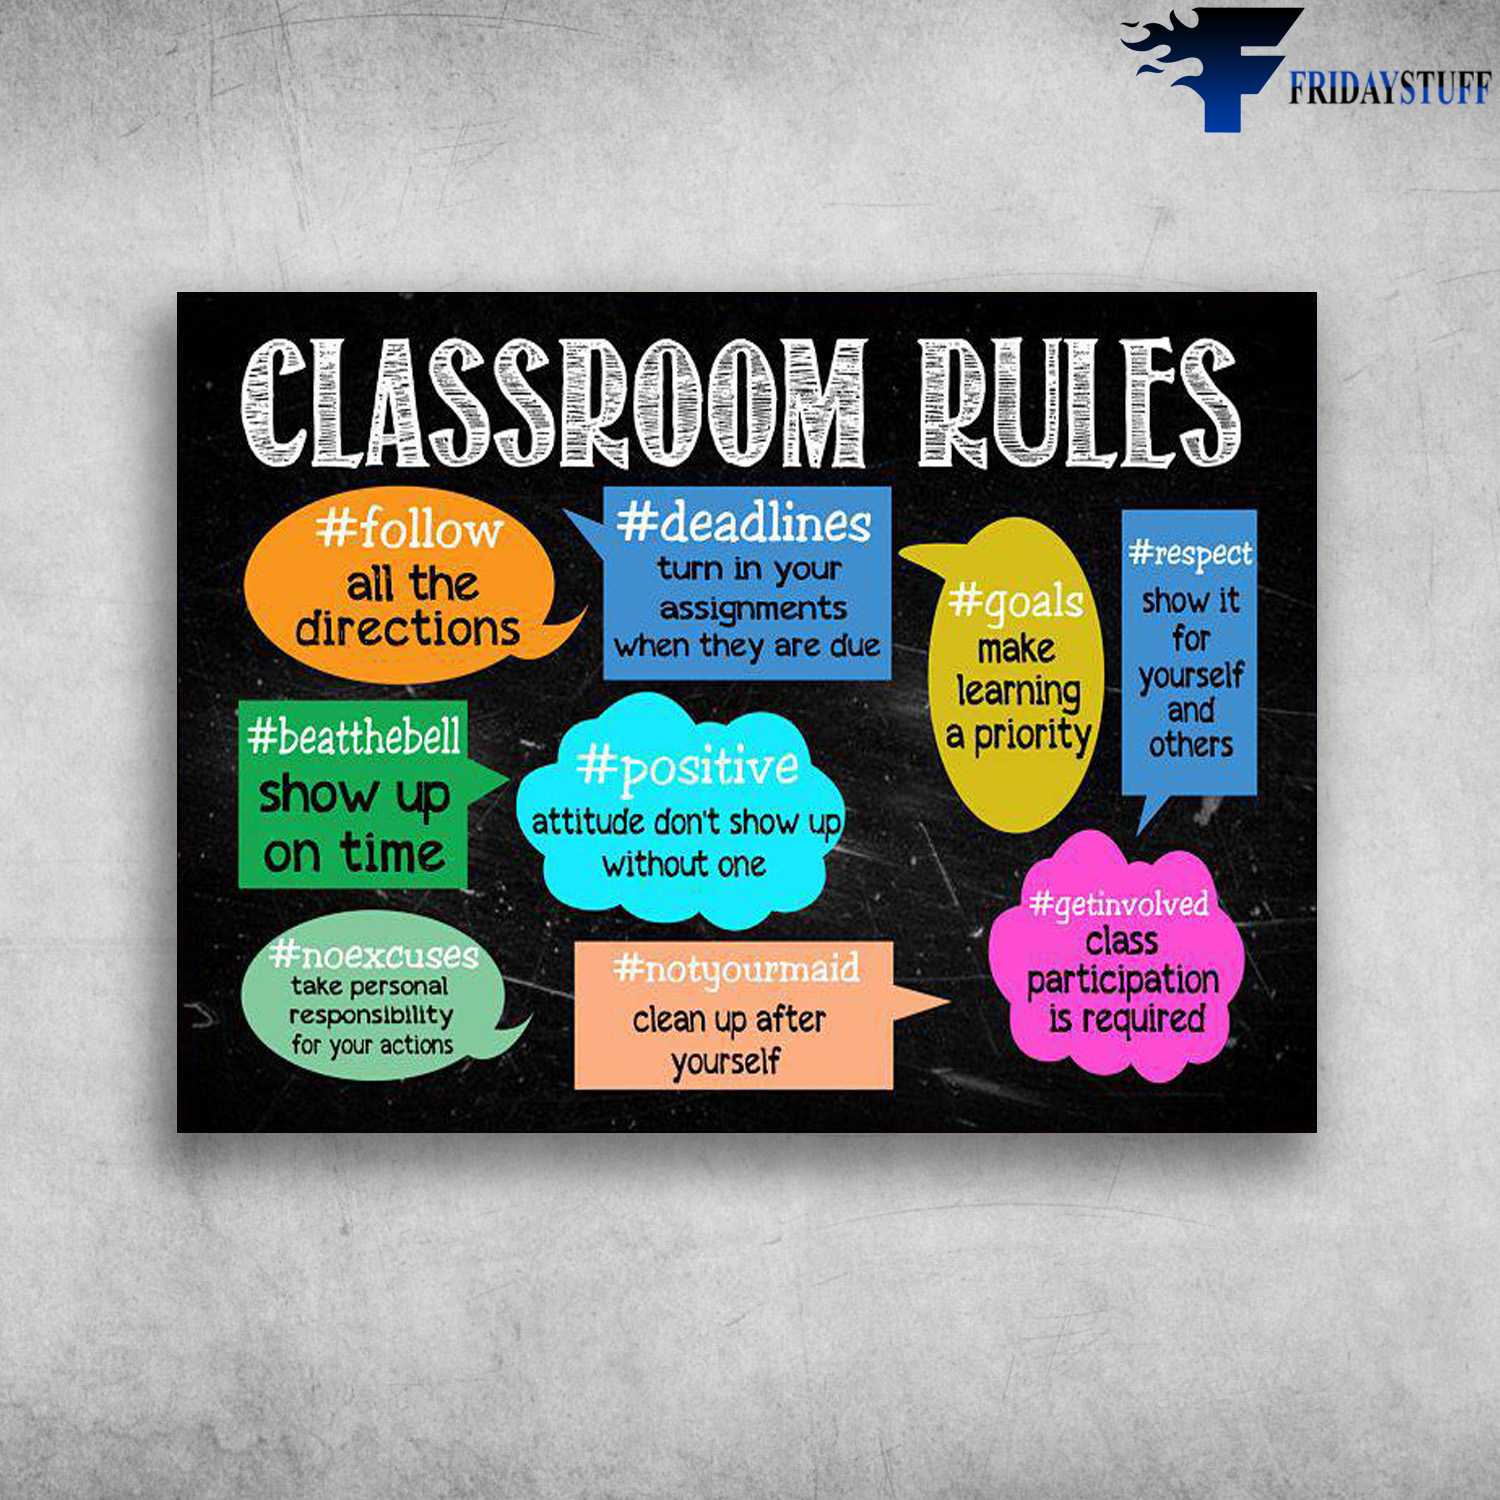 Classrome Rules, Follow All The Directions, Deadlines Turn In Your Assignments, When They Are Due, Goals Make Learning A Priority, Respect Show It For Yourself And Others